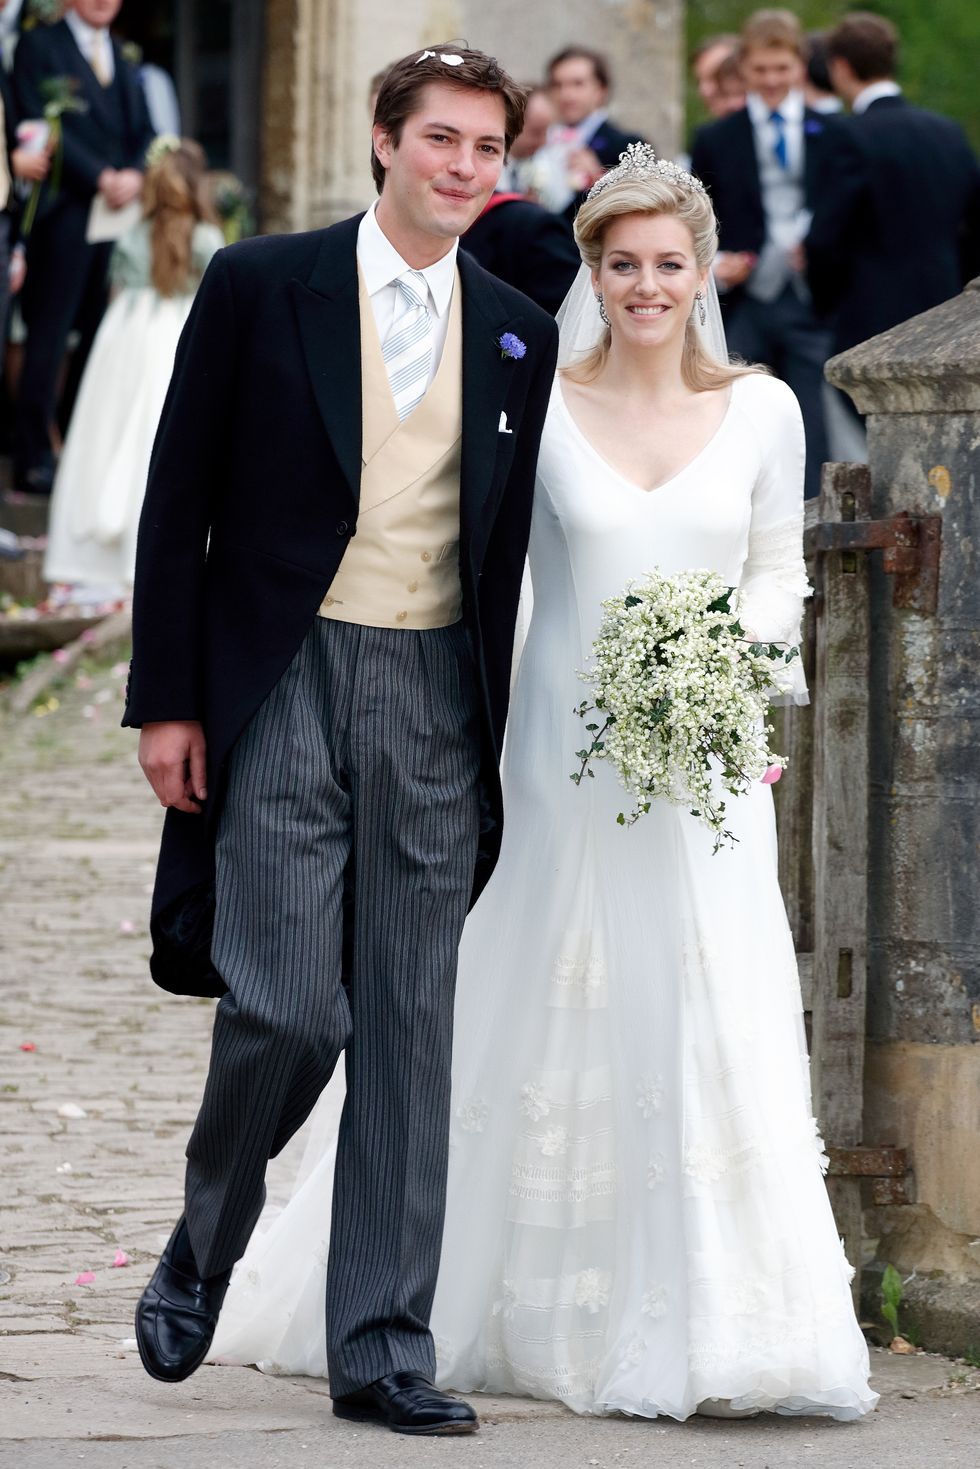 Laura Parker Bowles at her wedding to Harry Lopes